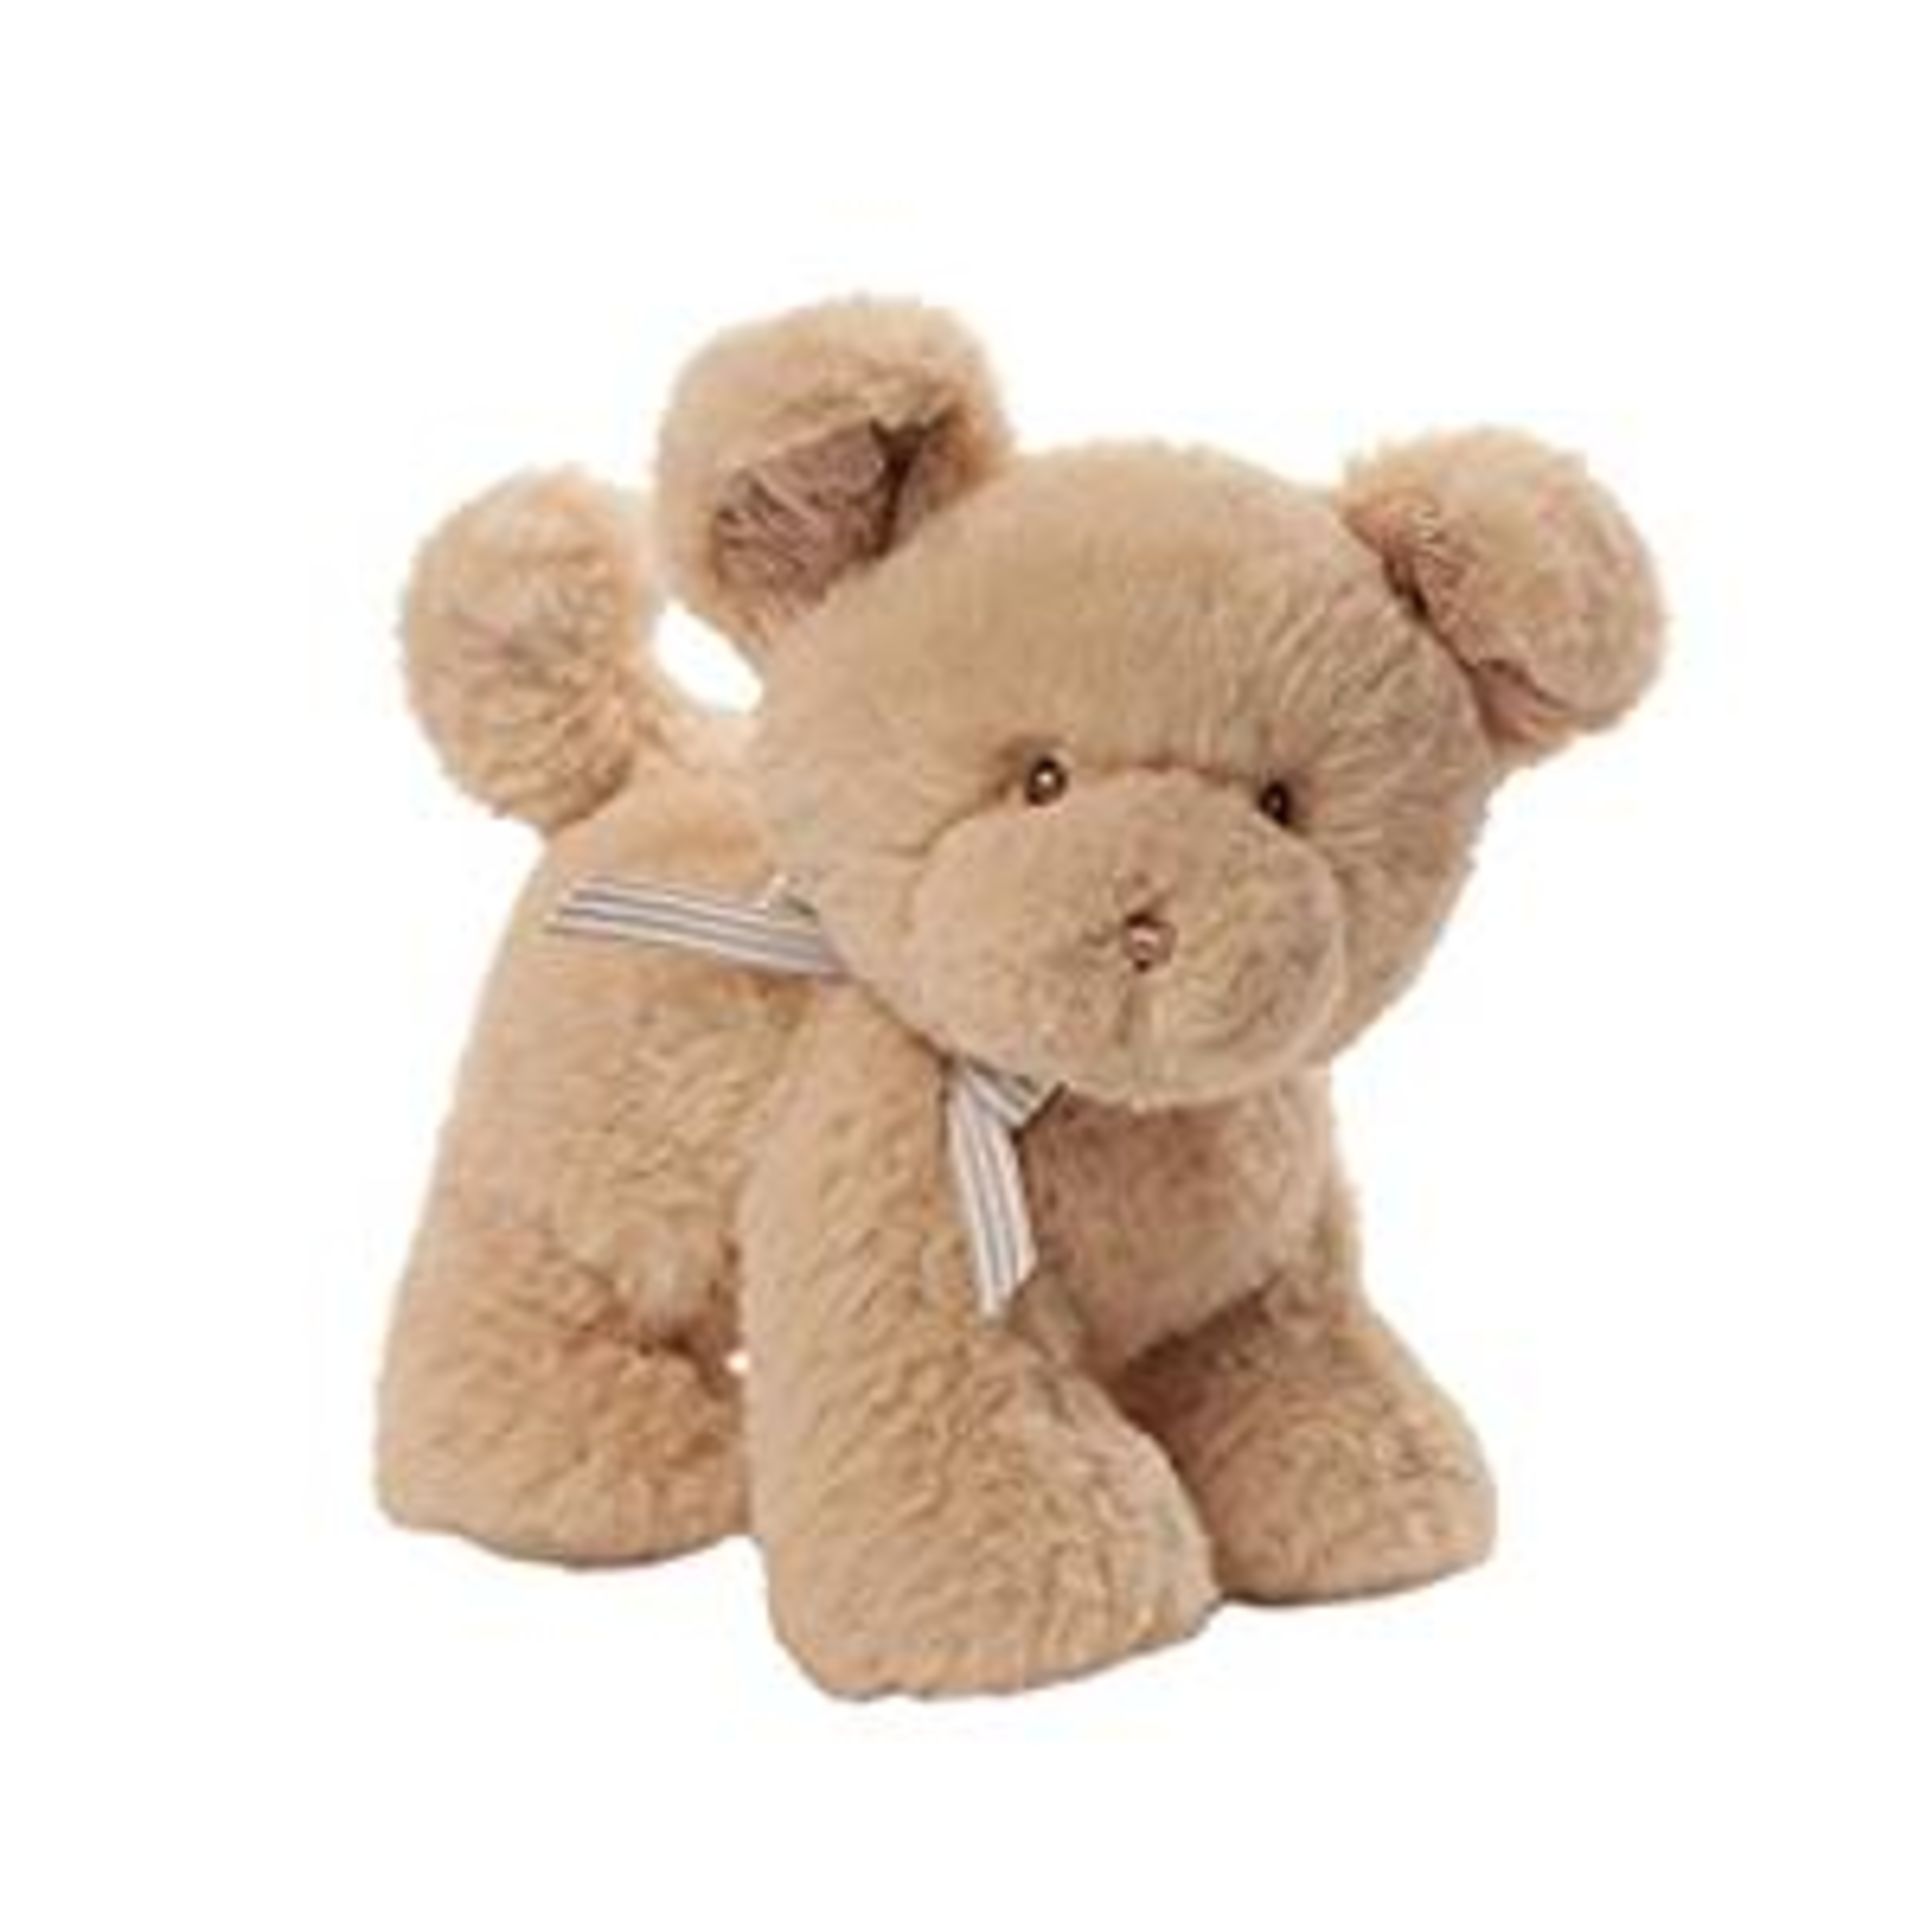 11 x Plush Soft Toy Dogs as listed | RRP £ 207.29 - Image 2 of 2